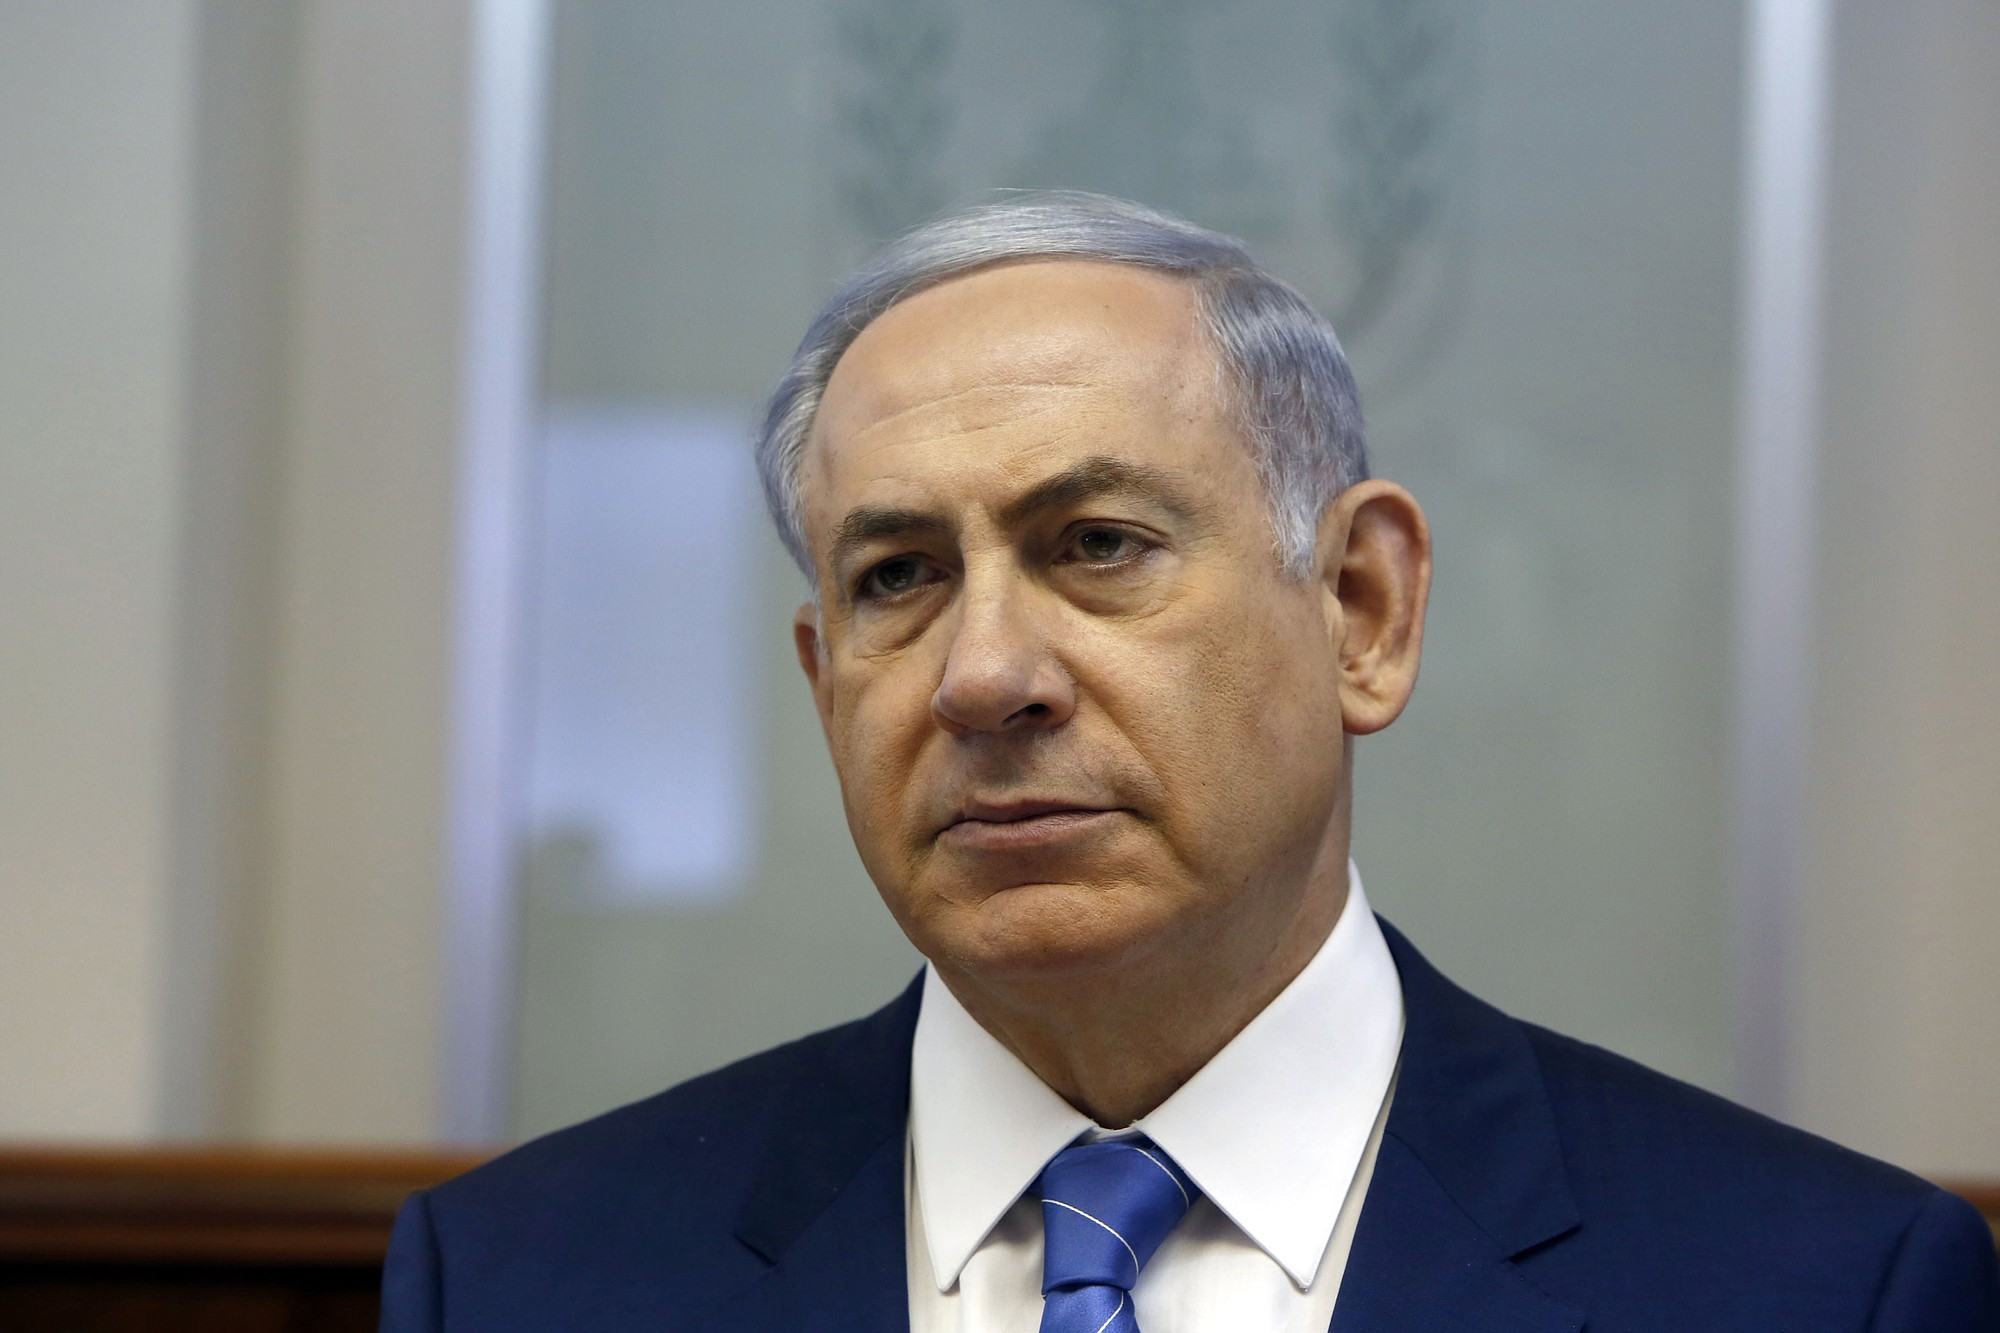 Israel's Prime Minister Benjamin Netanyahu chairs the weekly cabinet meeting in Jerusalem on Sunday.